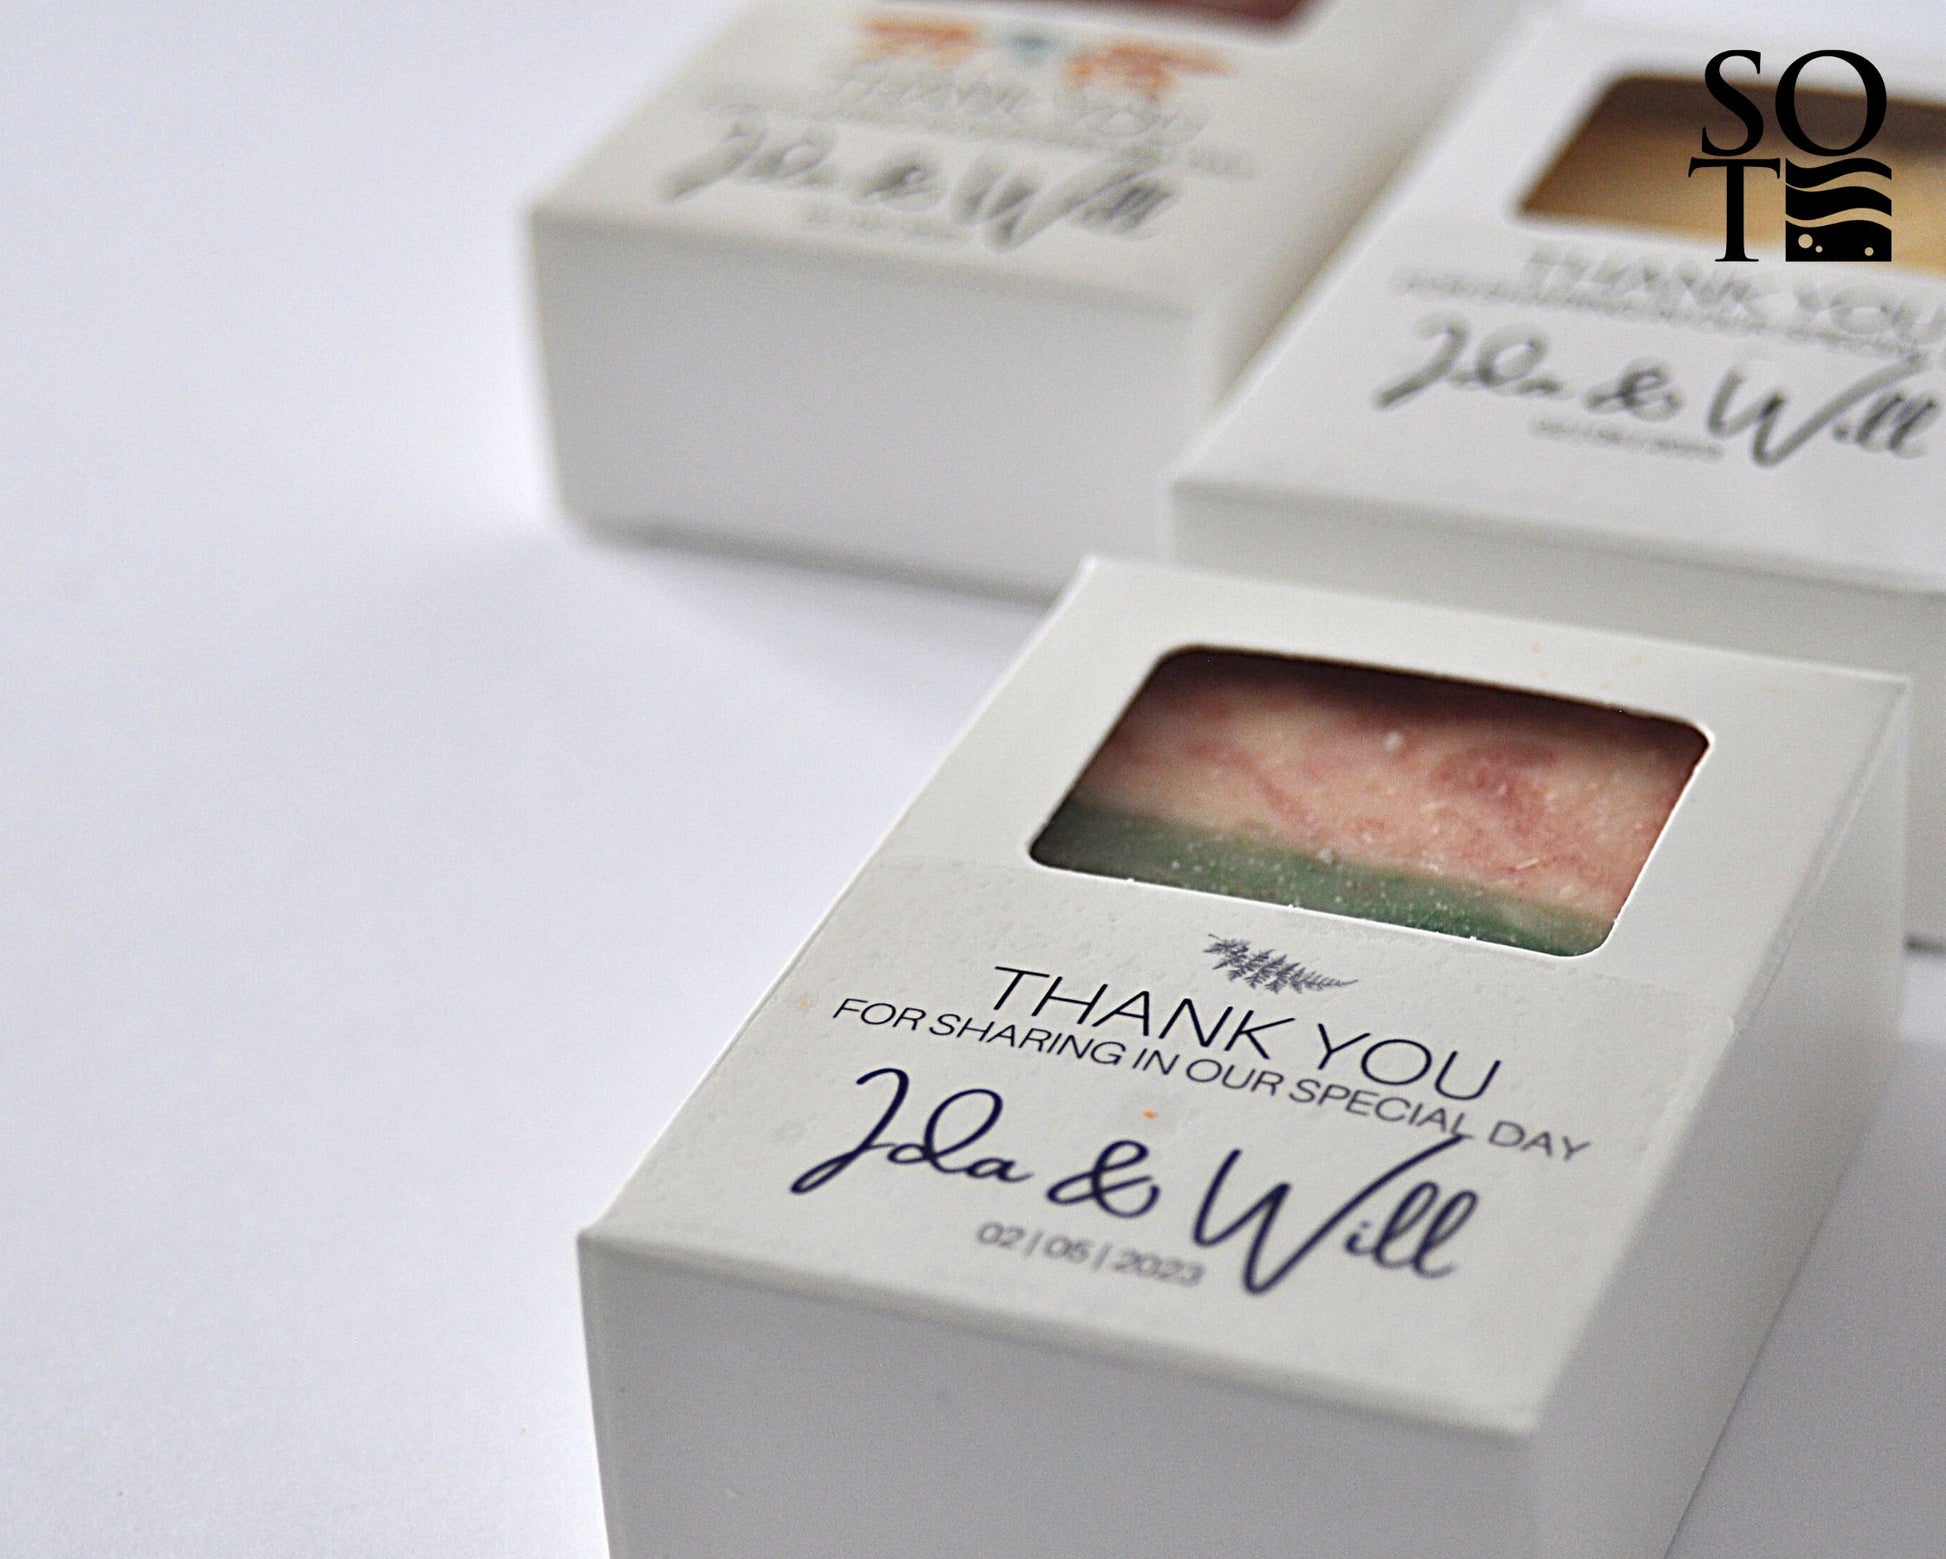 EVENTS | PERSONALIZED FAVOURS & GIFTS FOR INDIVIDUAL GIFTING, WEDDINGS, SHOWERS & CORPORATE EVENTS - SALT OF THE EARTH